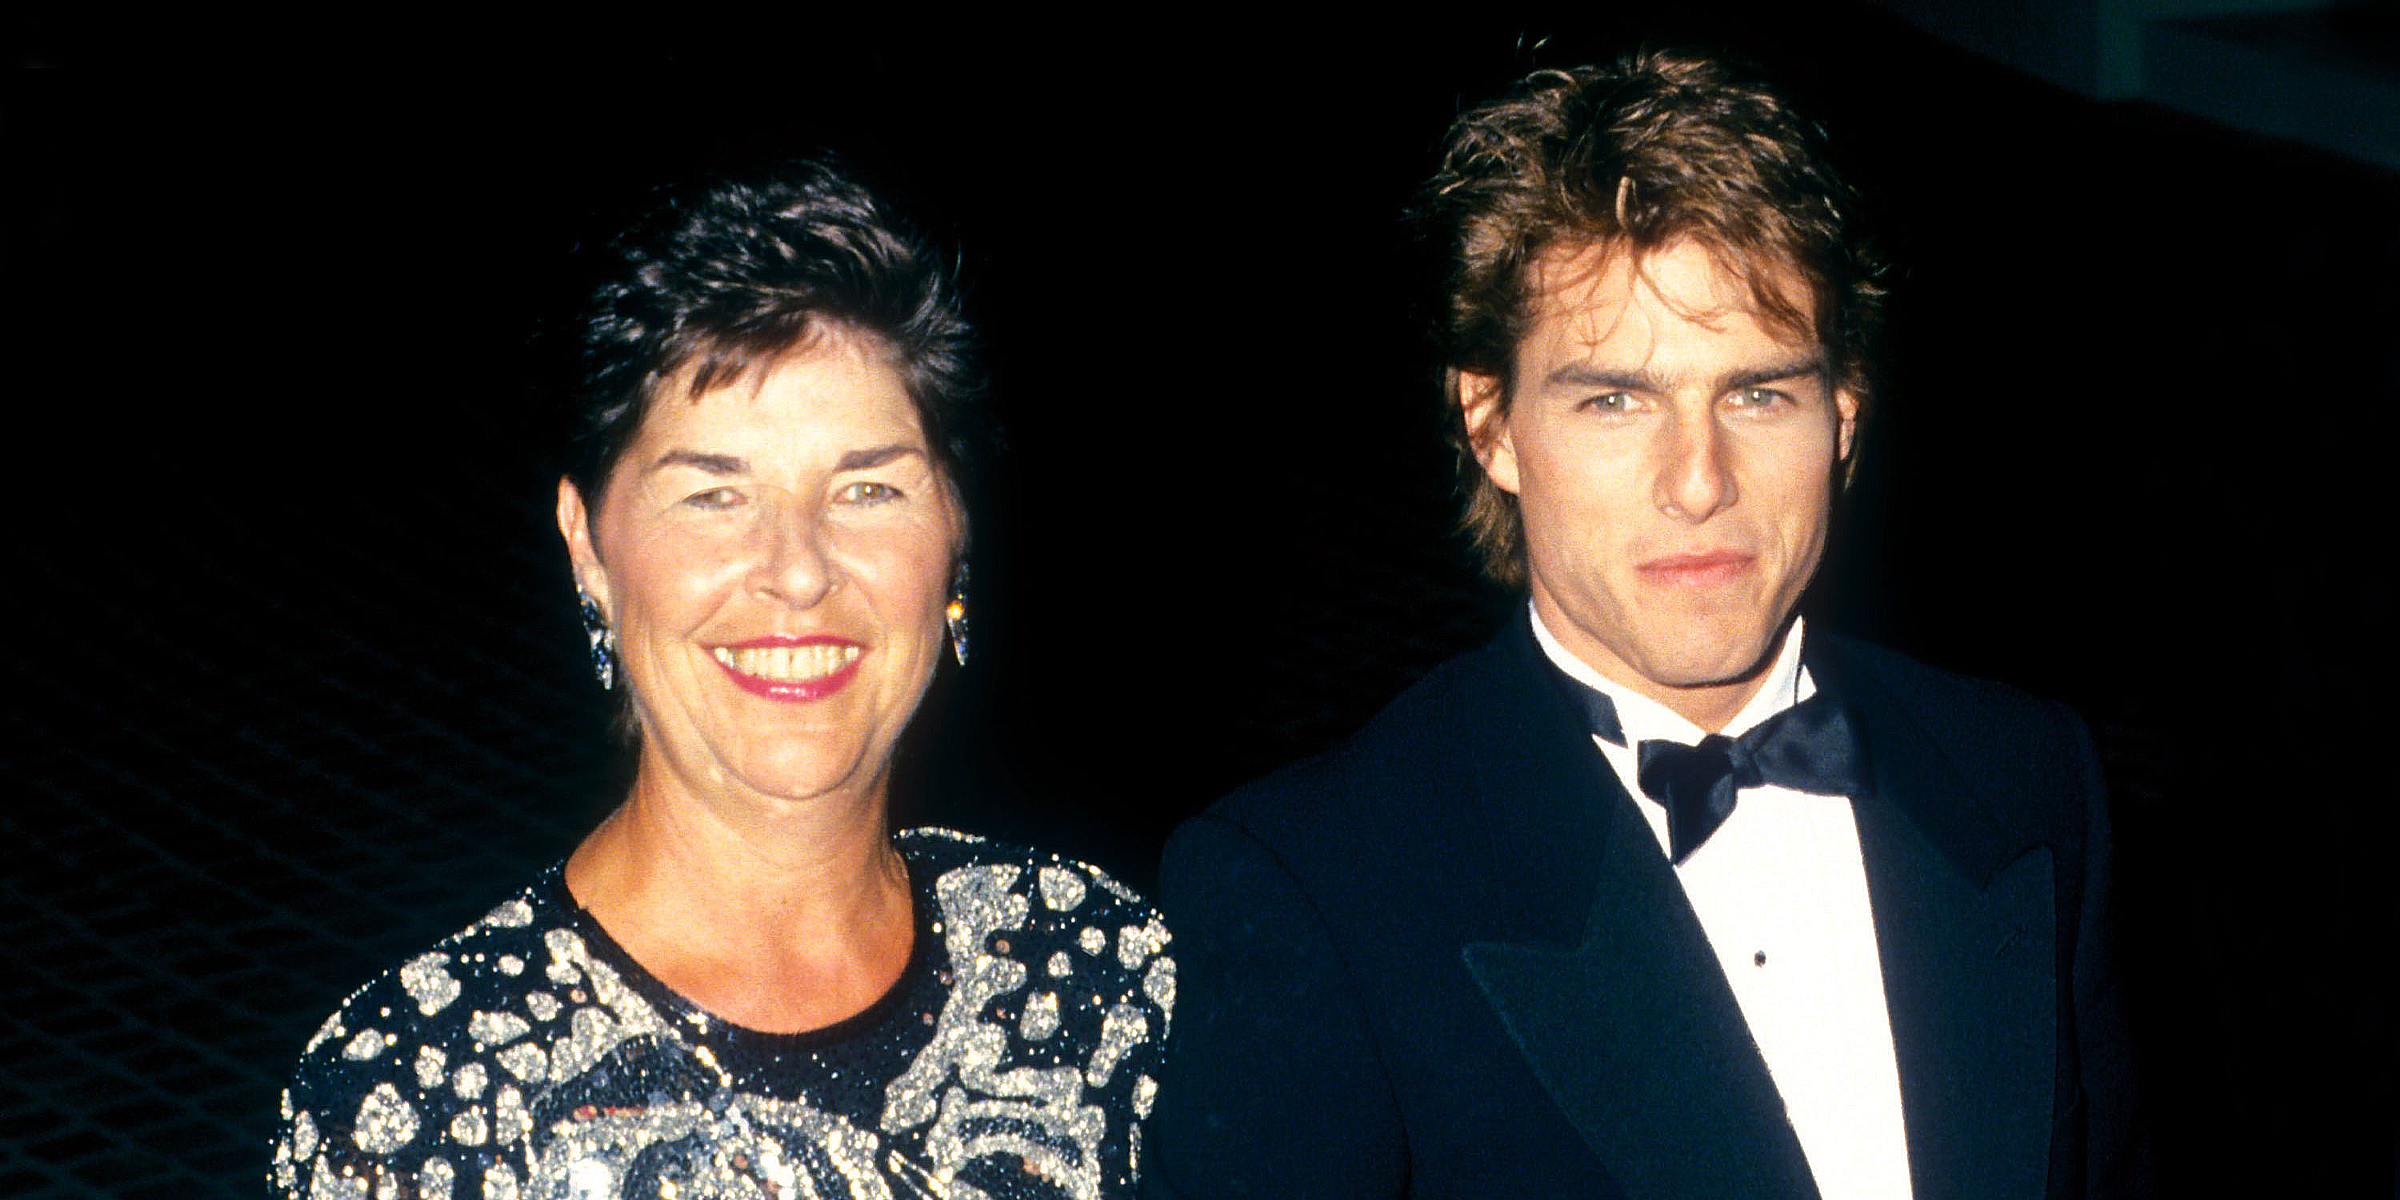 Mary Lee Pfeiffer y Tom Cruise. | Foto: Getty Images